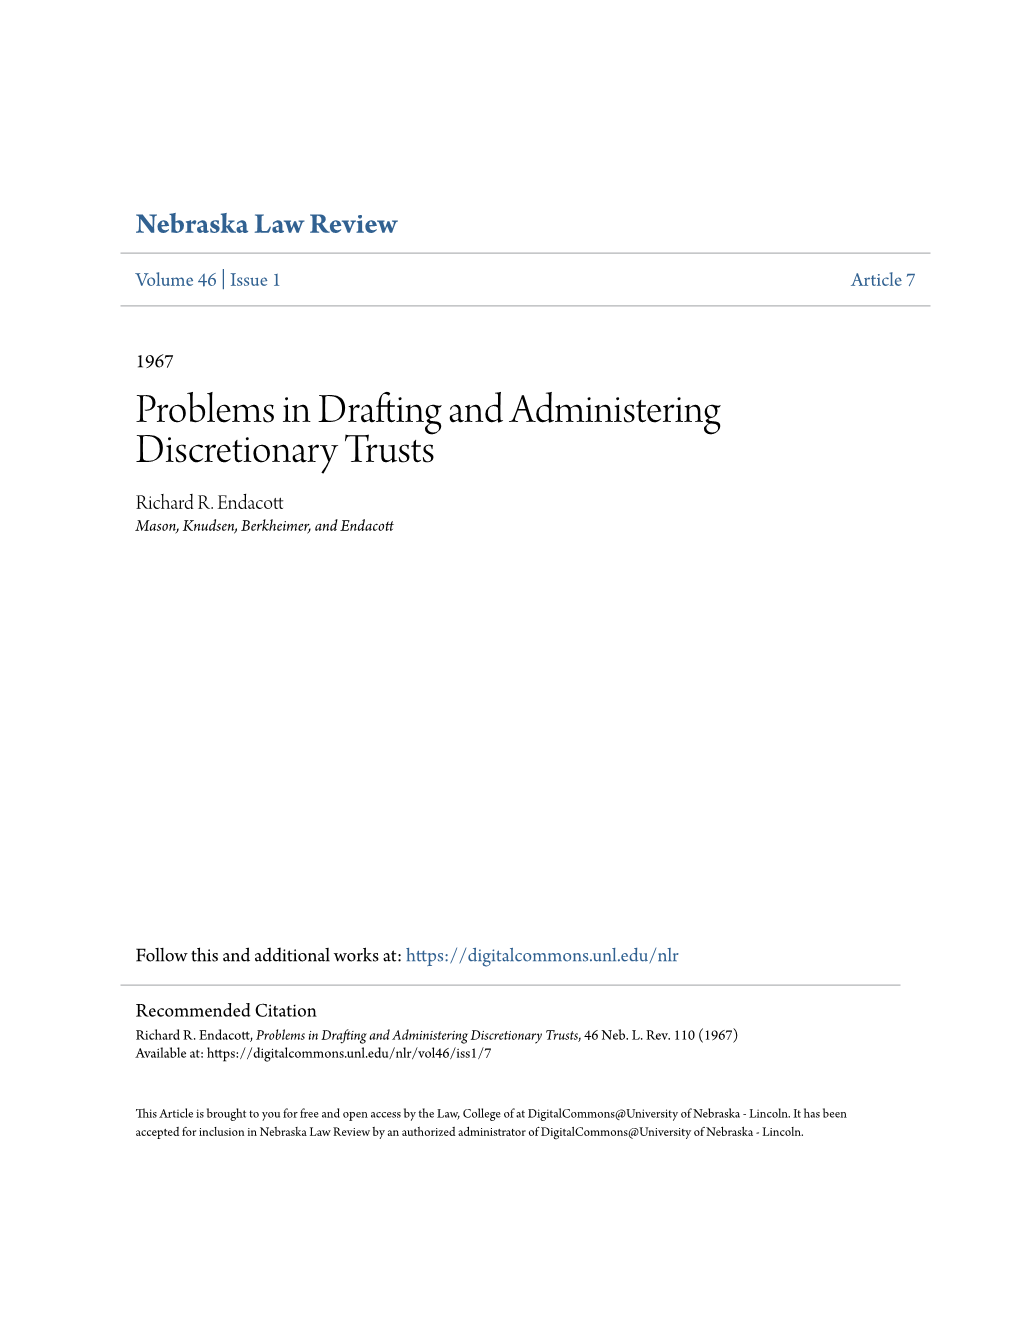 Problems in Drafting and Administering Discretionary Trusts Richard R